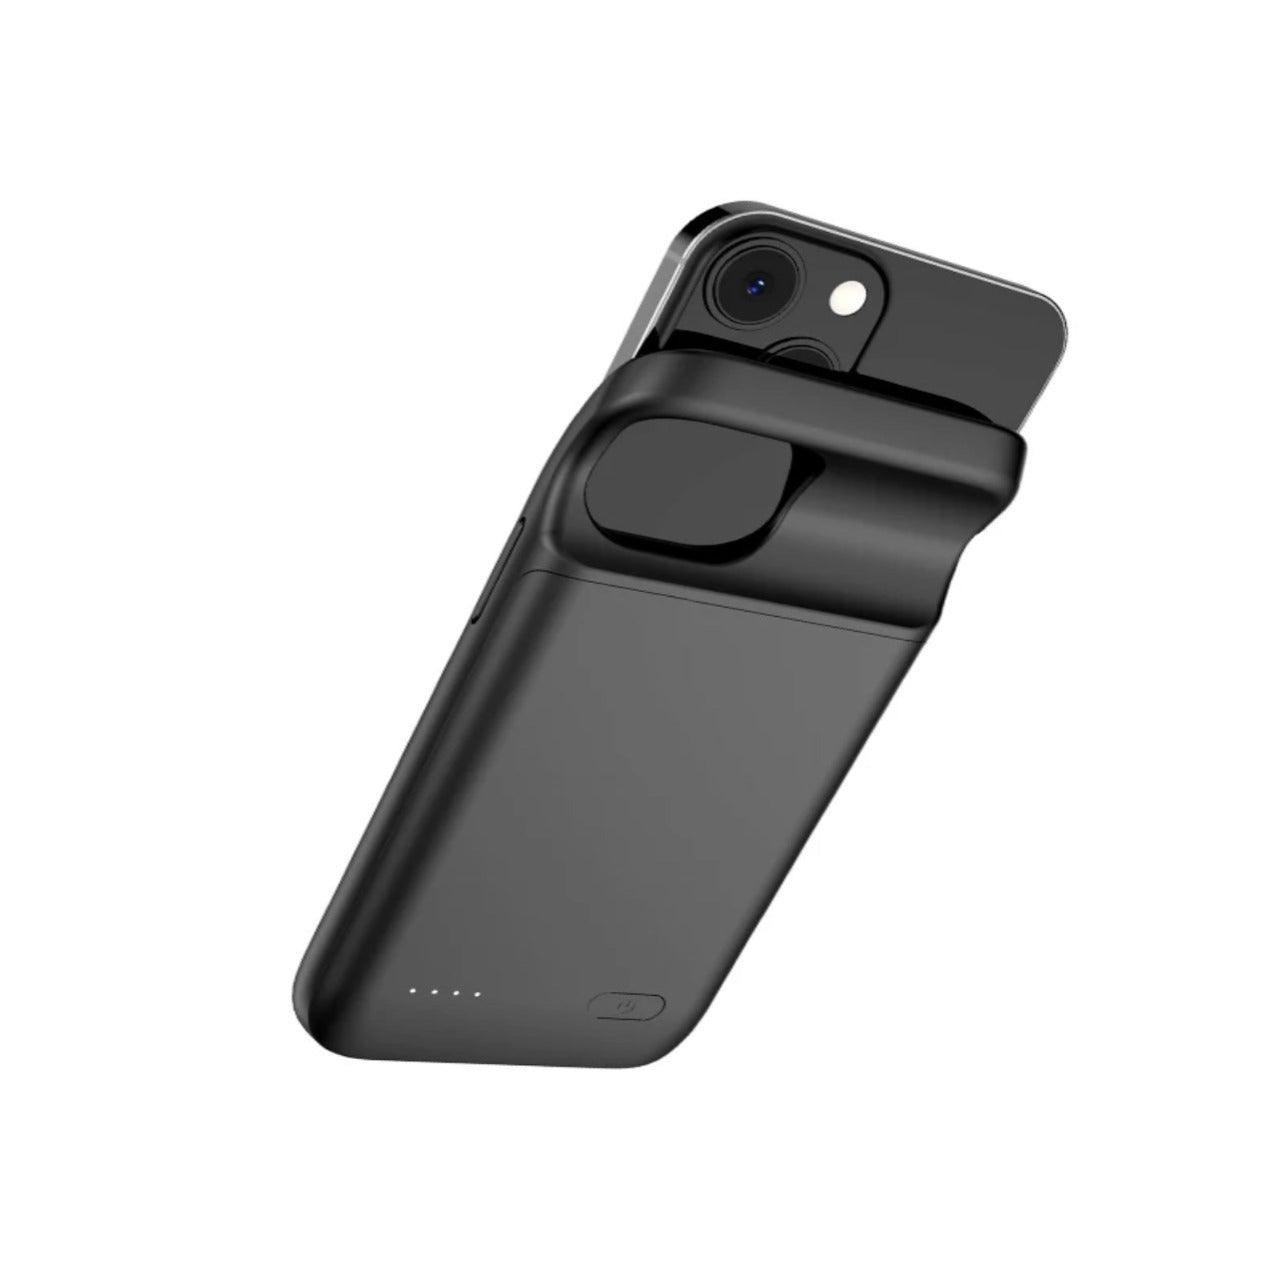 Iphone Battery Case - Expat Life Style